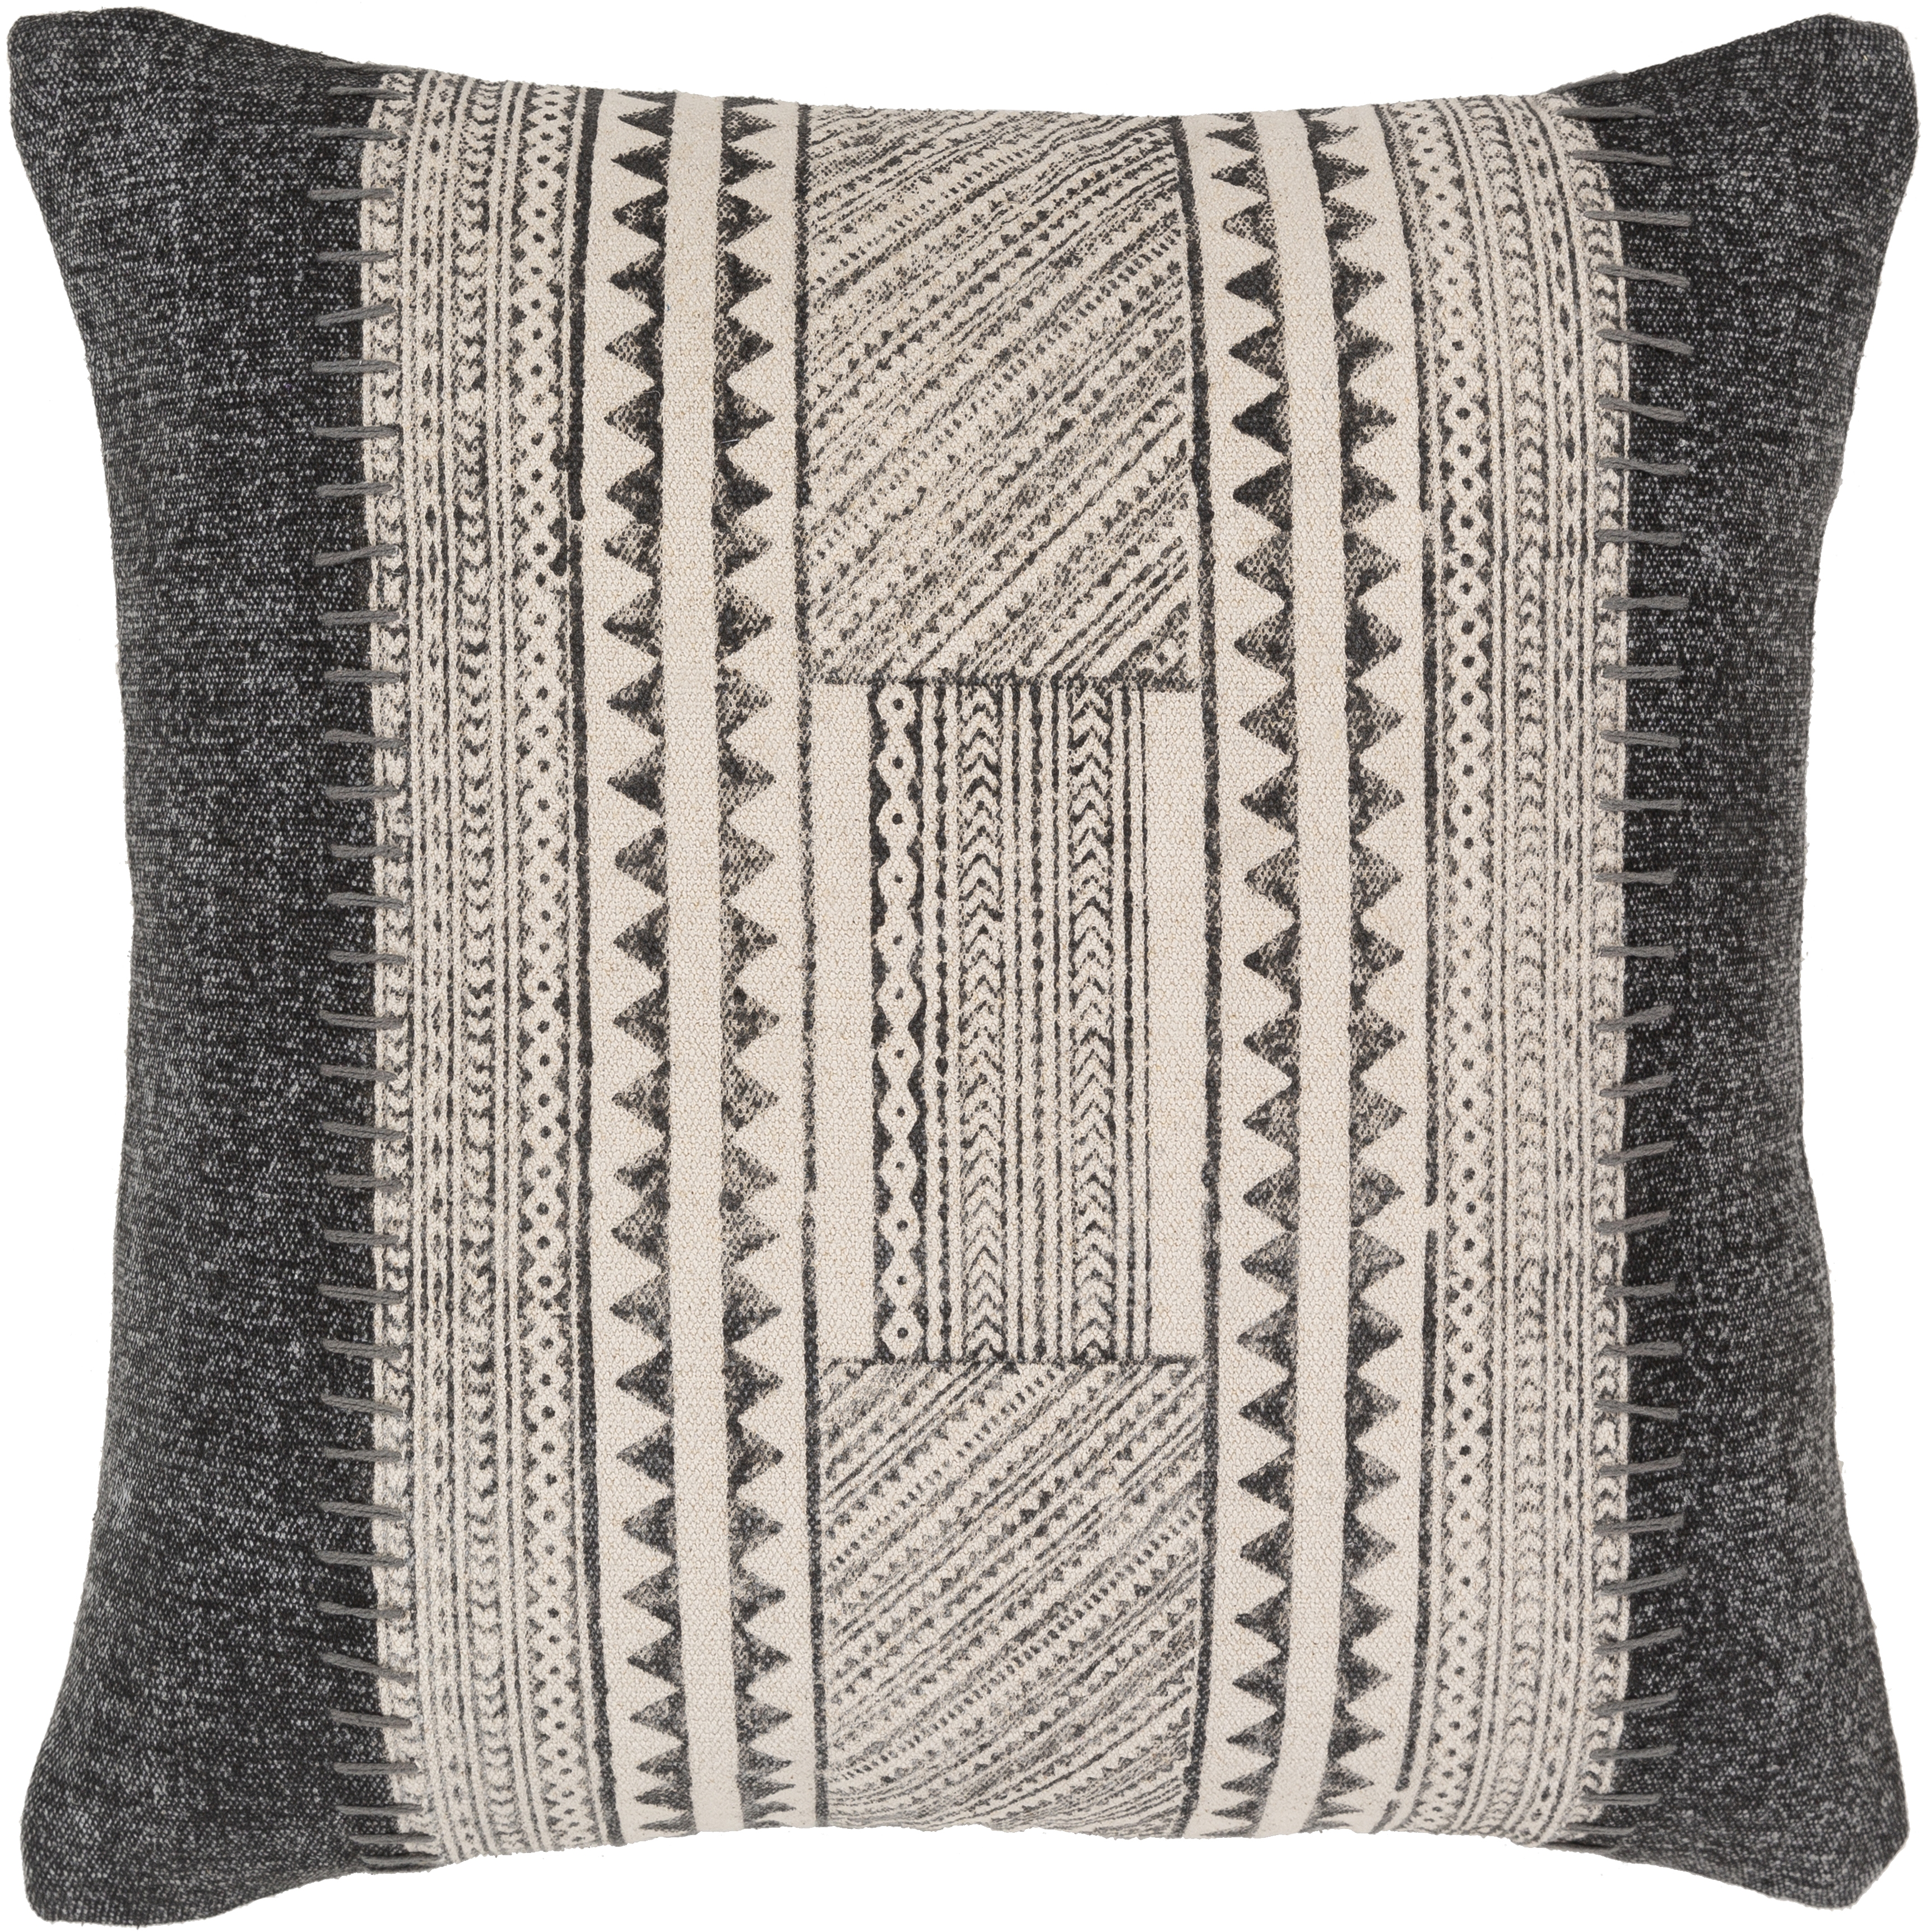 Lola Throw Pillow, 20" x 20", with down insert - Image 0